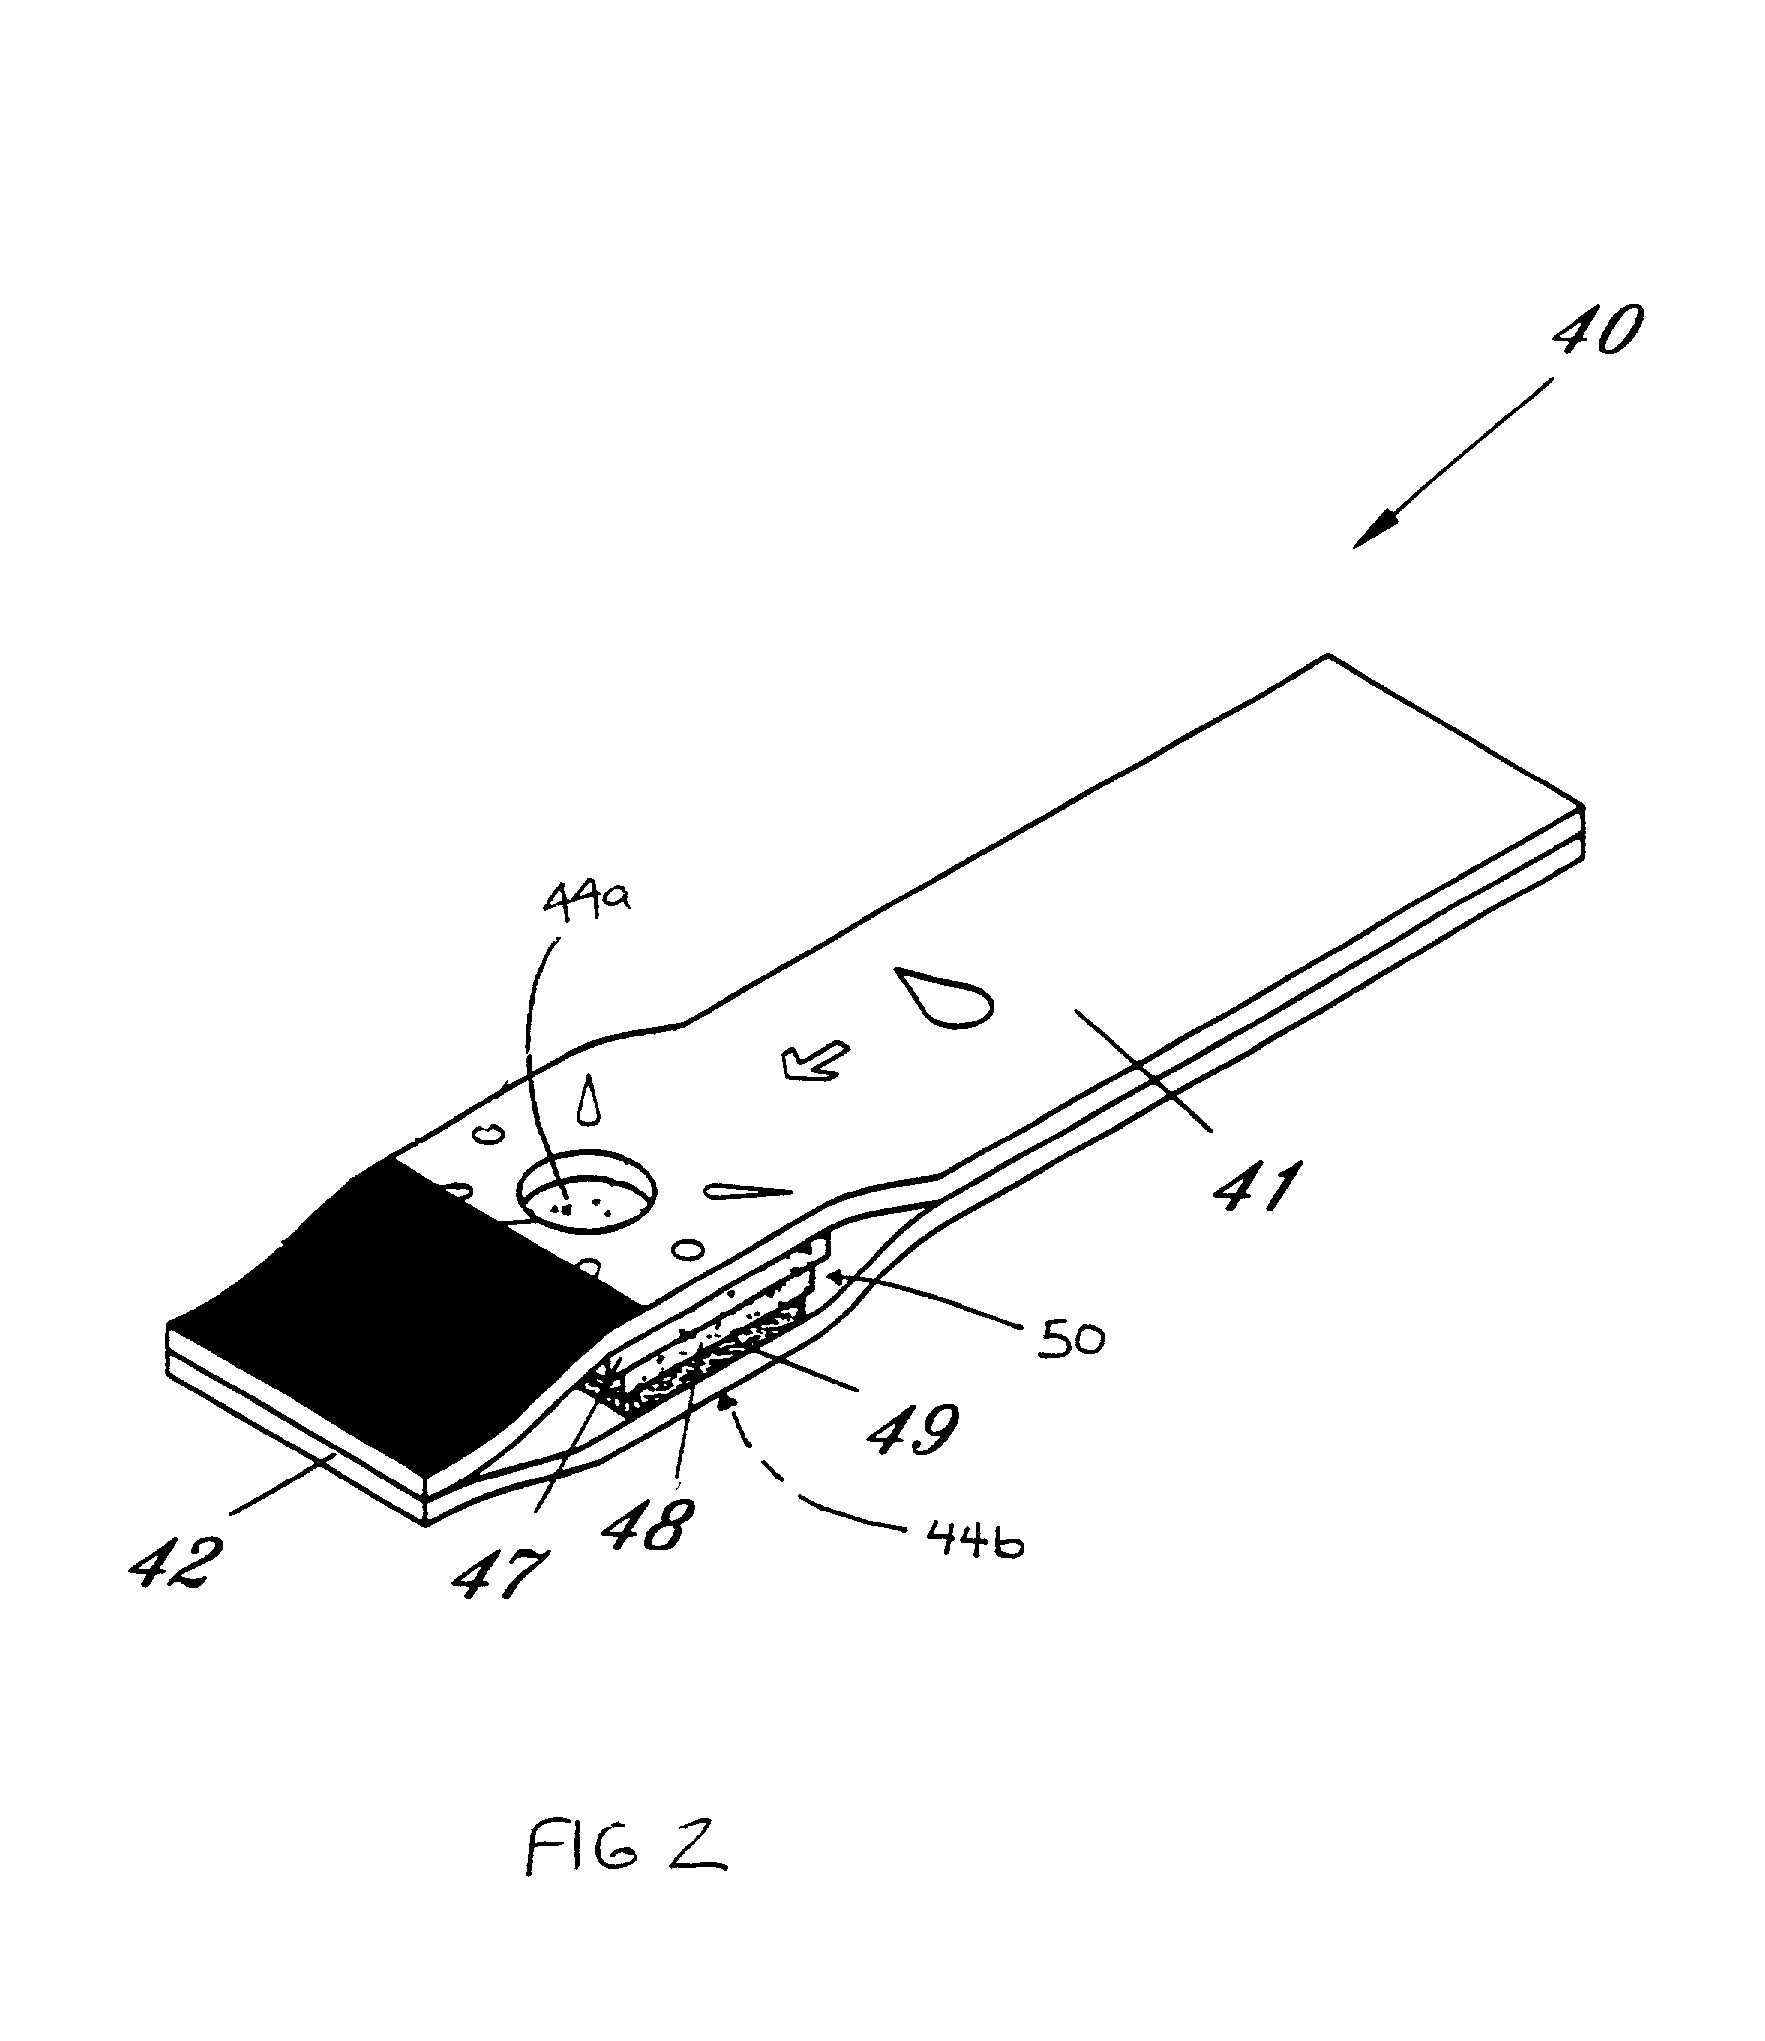 Method for determining concentration of an analyte in a test strip